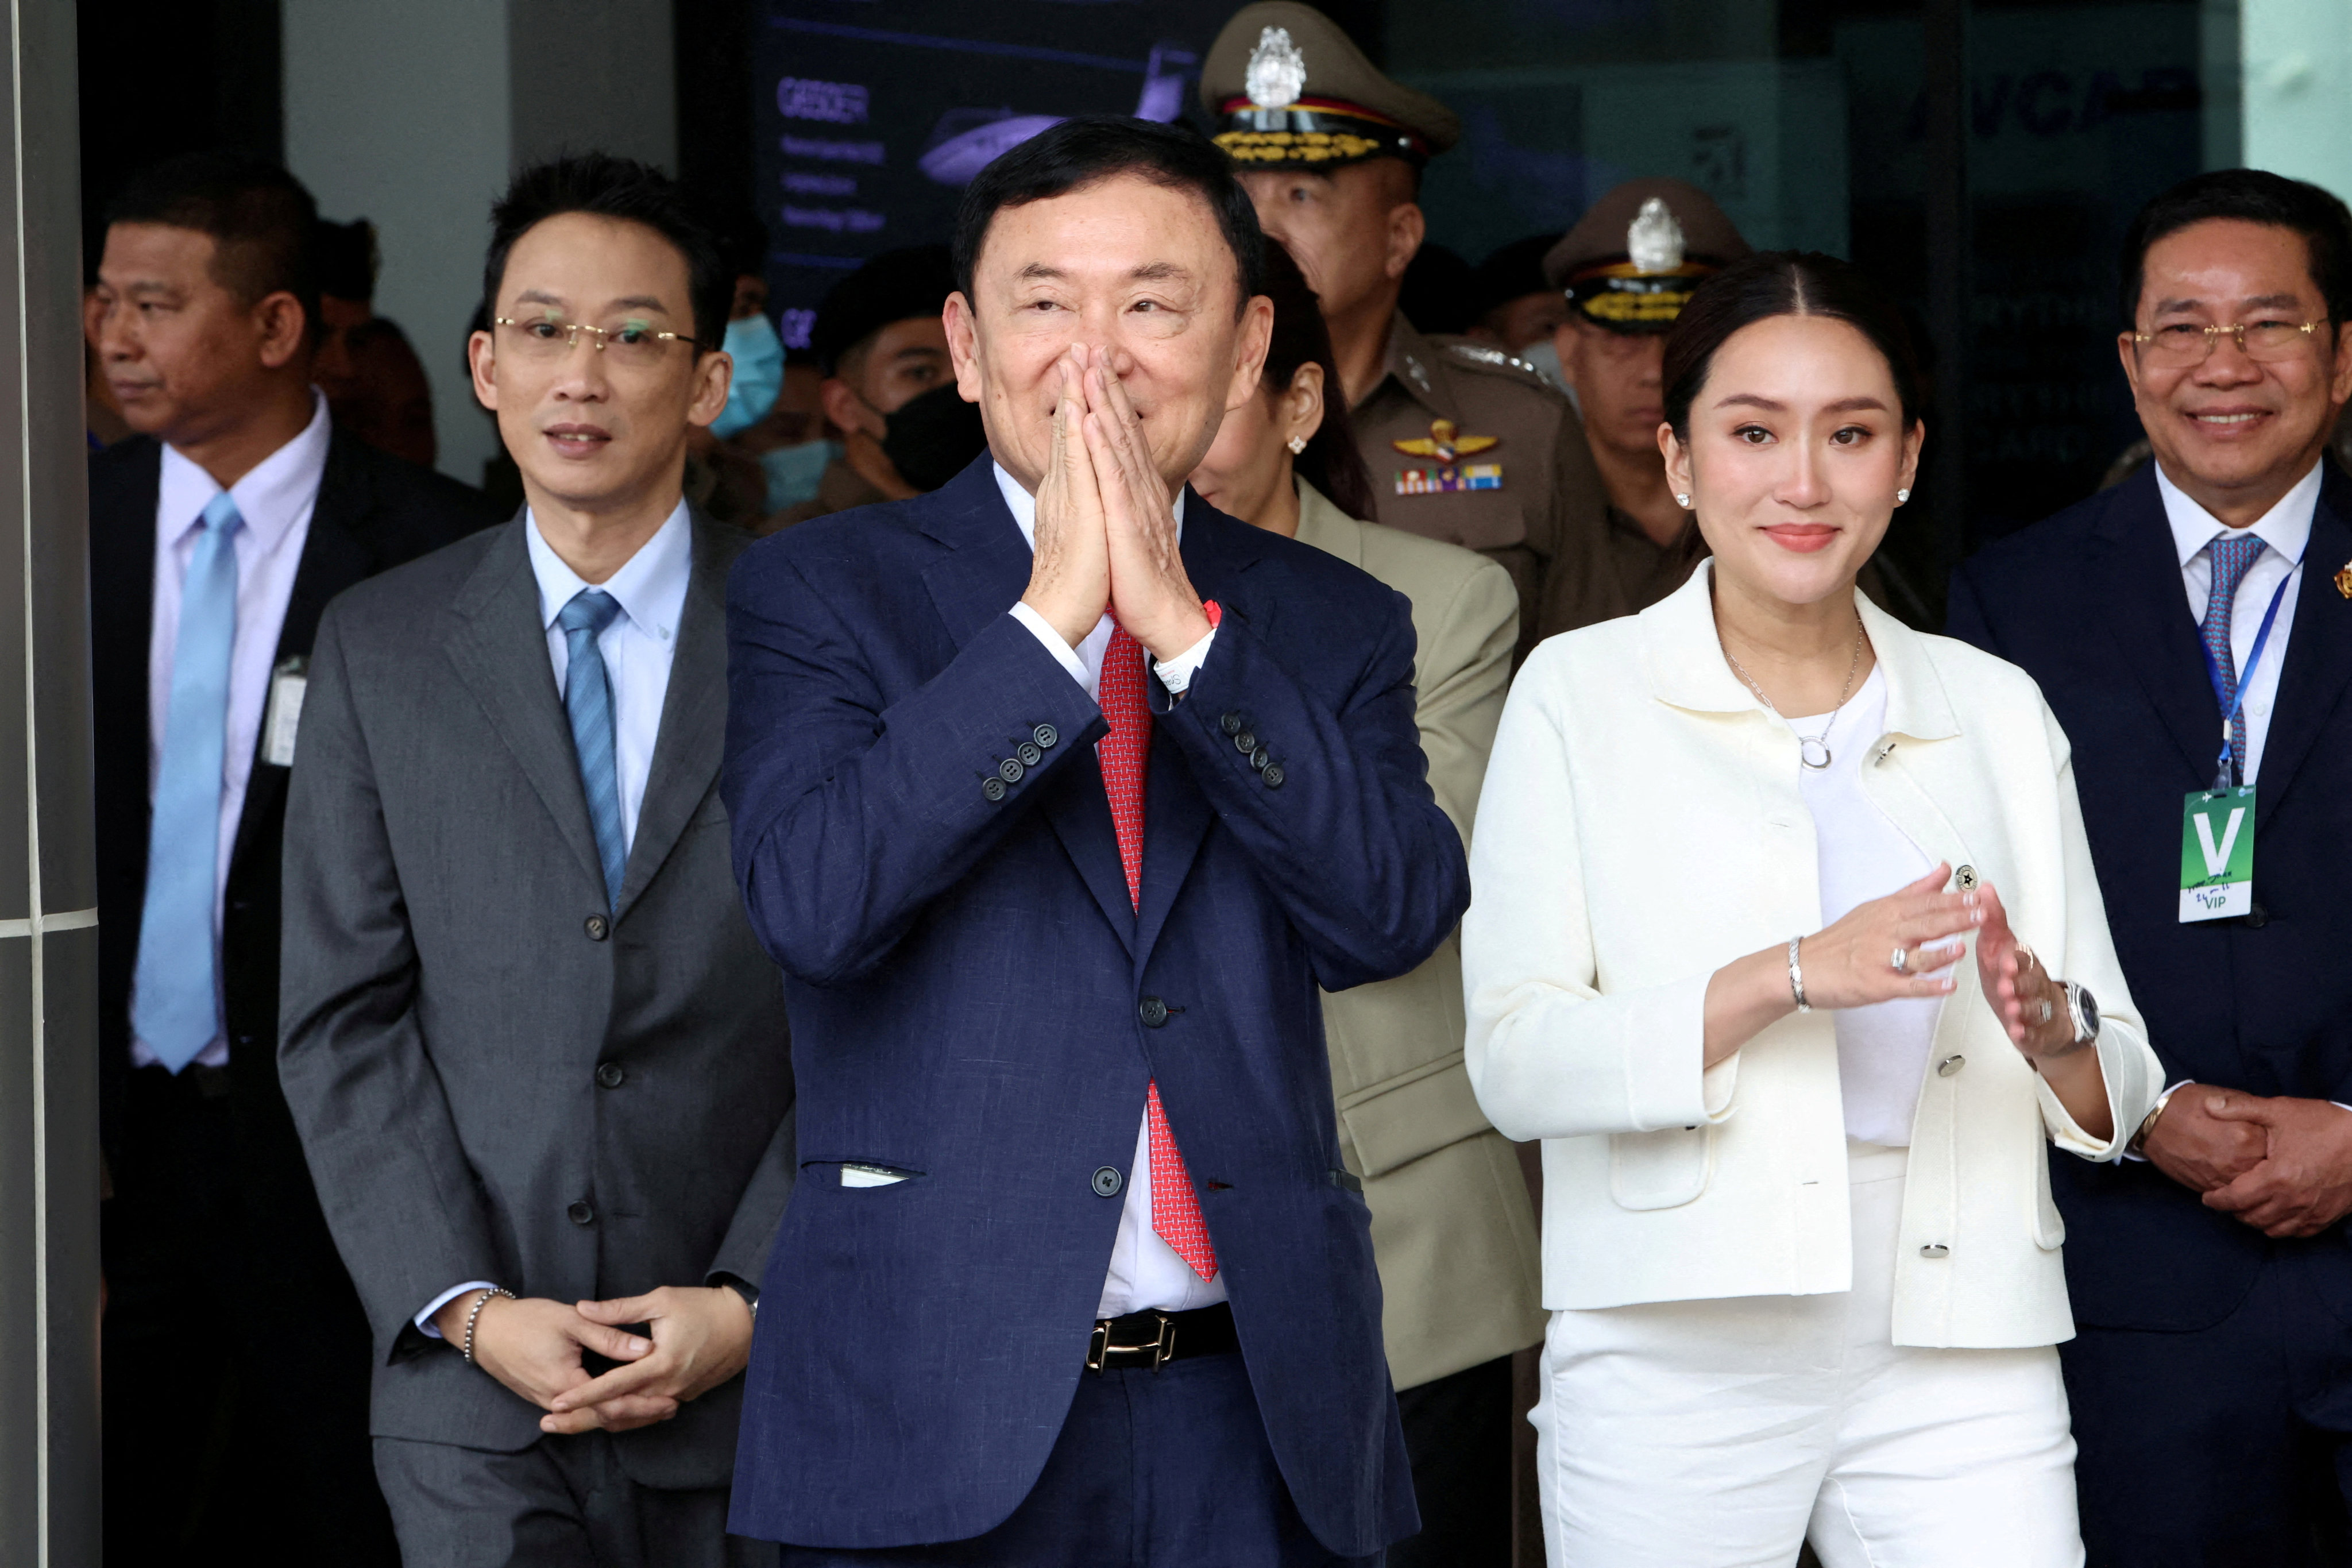 Former Thai prime minister Thaksin Shinawatra flanked by his son Panthongtae and daughter Paetongtarn at Bangkok’s Don Mueang airport on August 22. Thailand’s most famous politician made a dramatic homecoming last month, 15 years after he entered self-exile, having been ousted by a military coup in 2006. Photo: Reuters